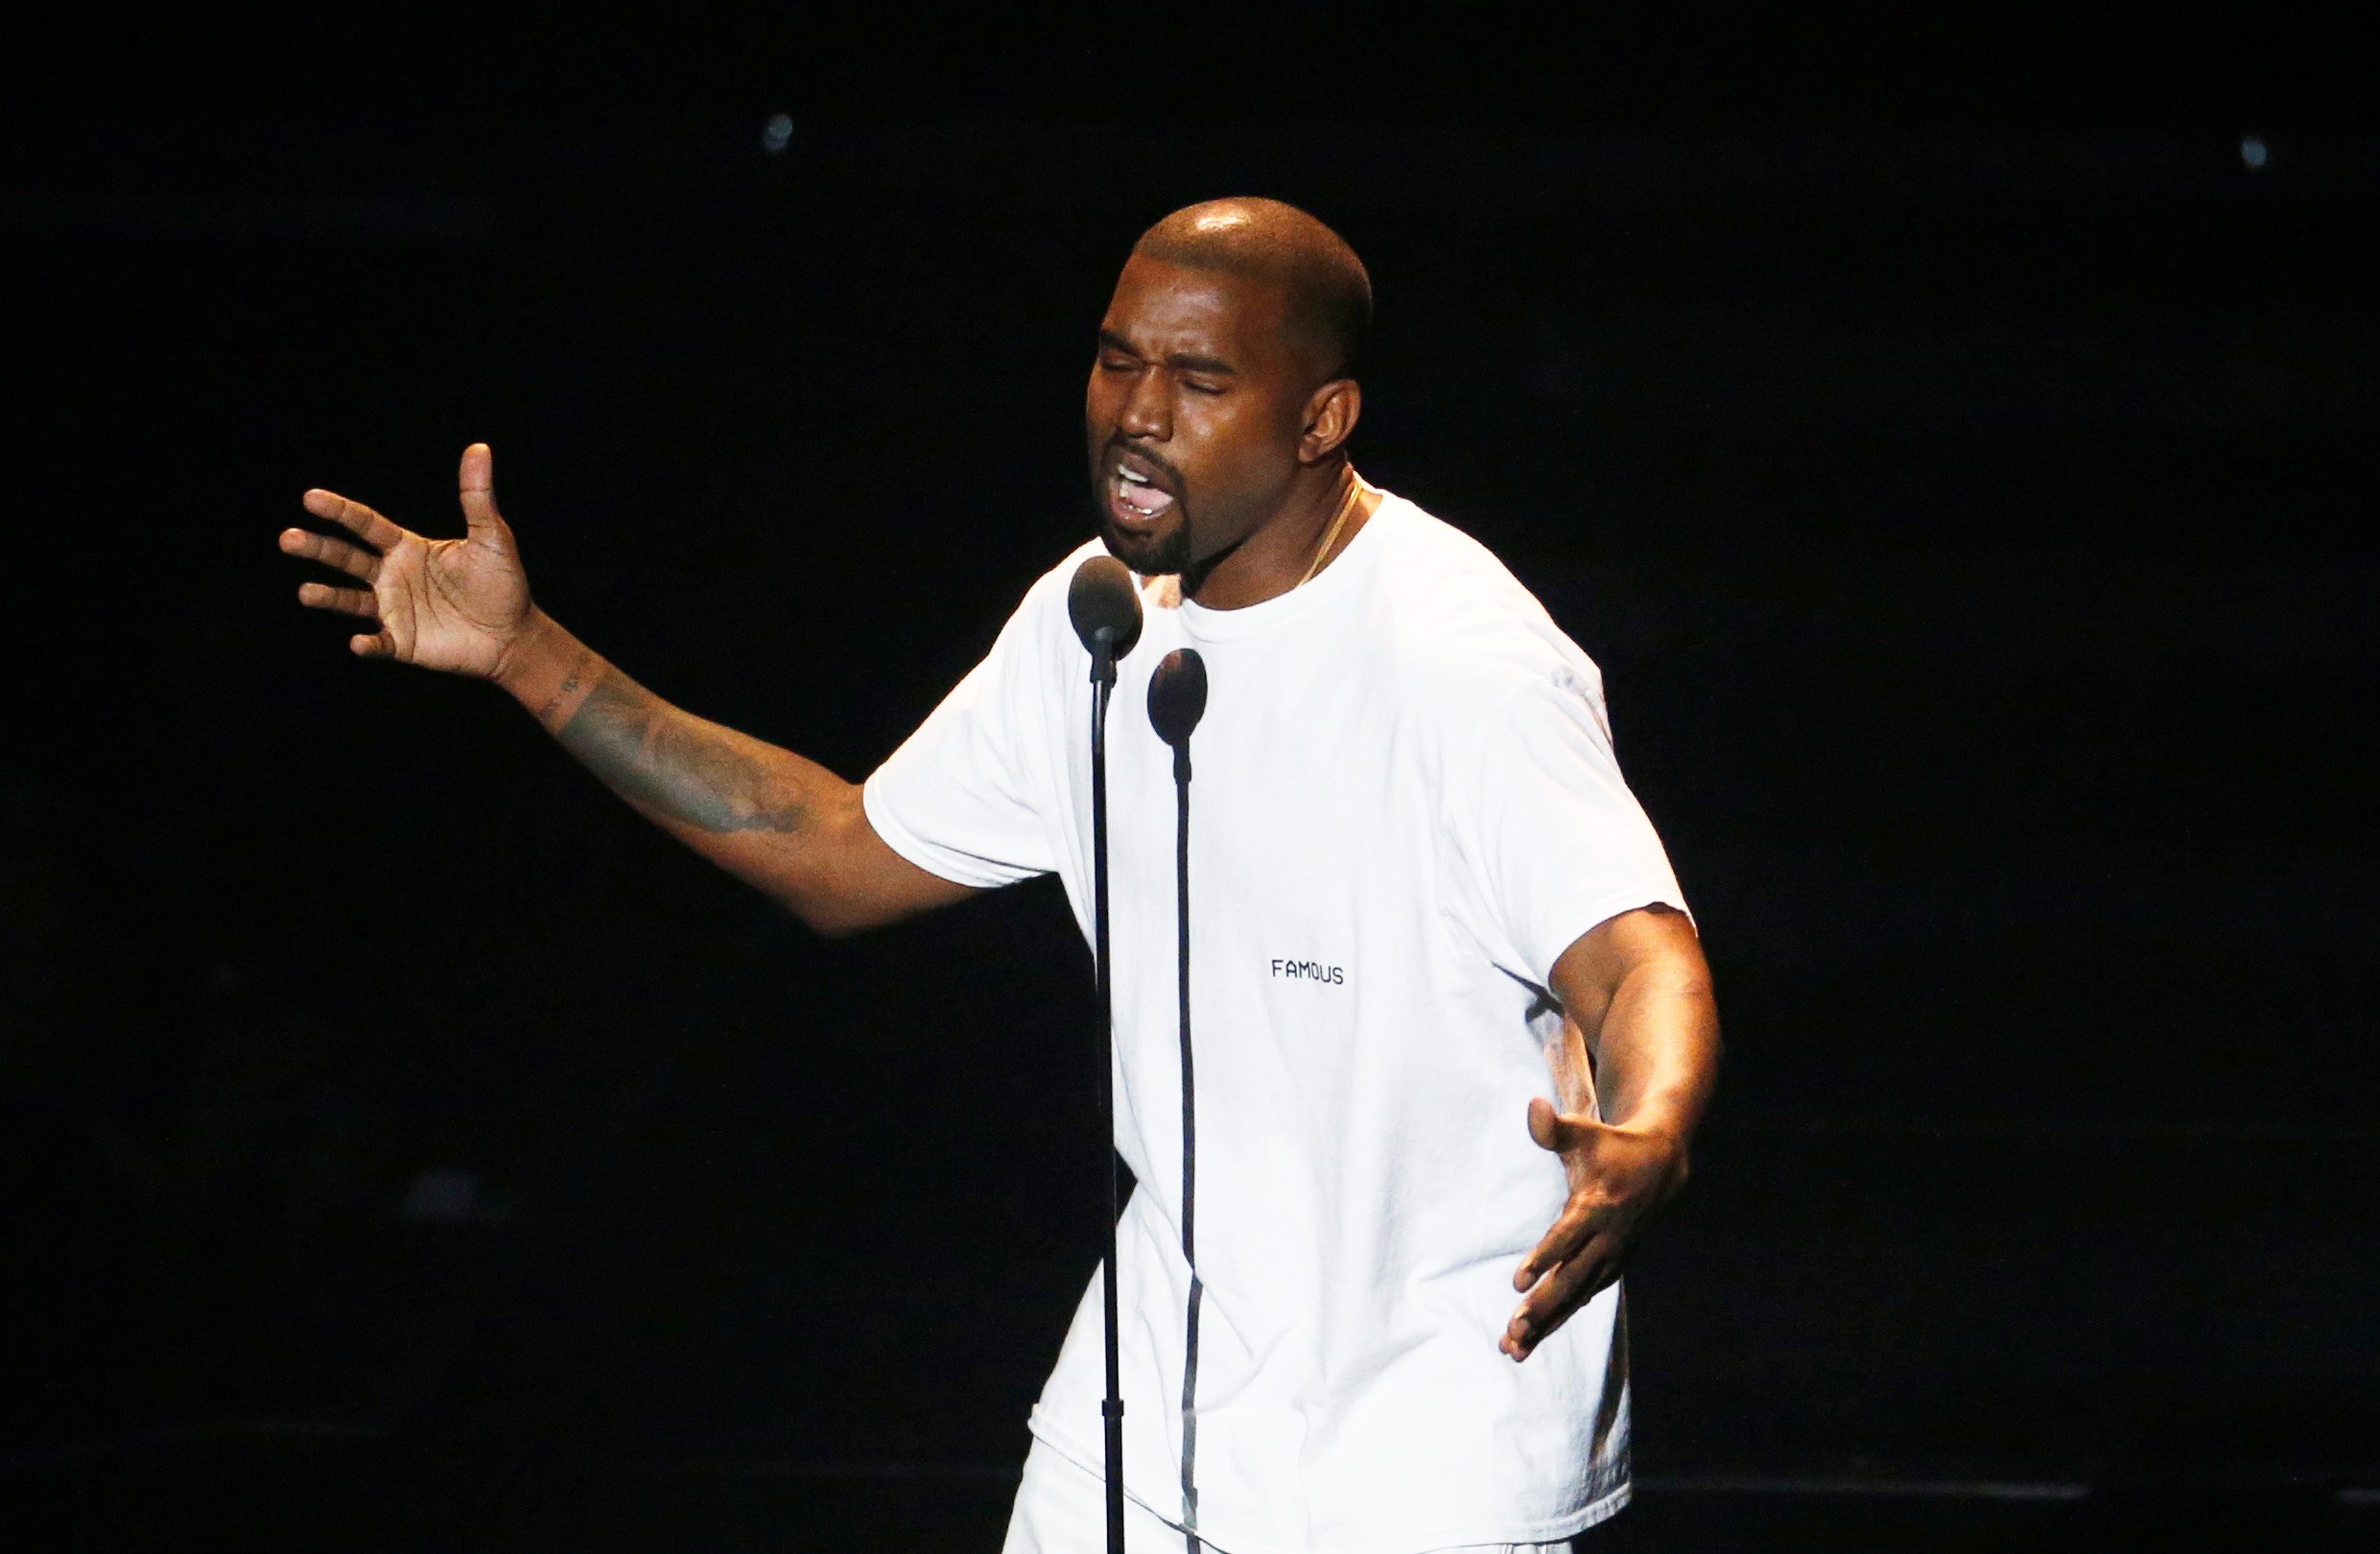 Seek and Ye shall find: Kanye West officially changes name